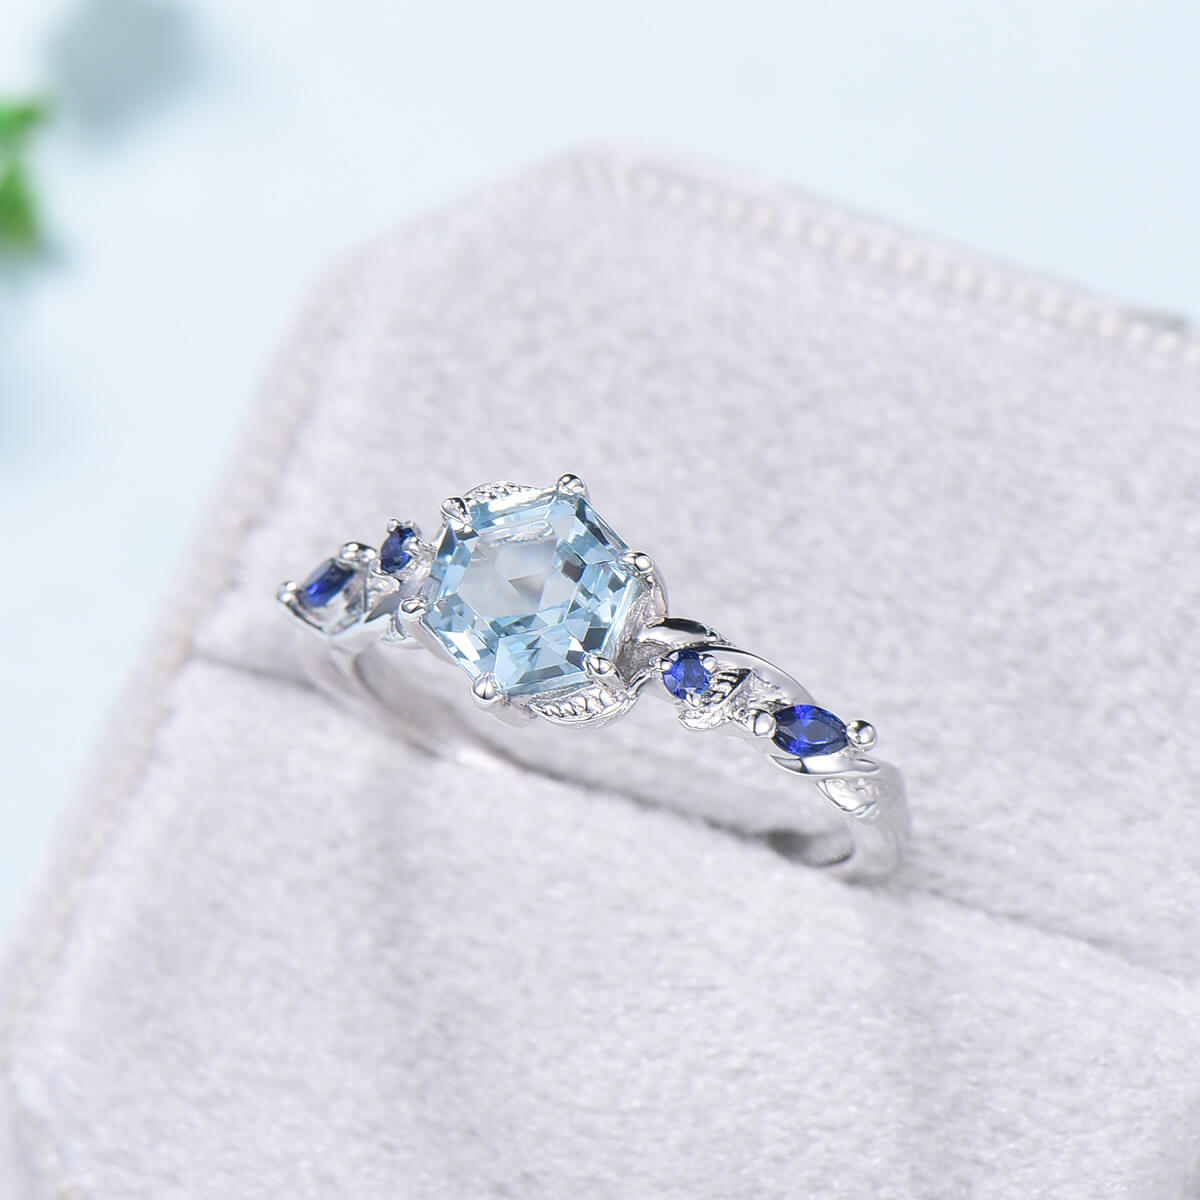 Nature Inspired Aquamarine Engagement Ring Twig Twisted Branch cluster Sapphire Promise Ring Unique March birthstone wedding ring for women - PENFINE